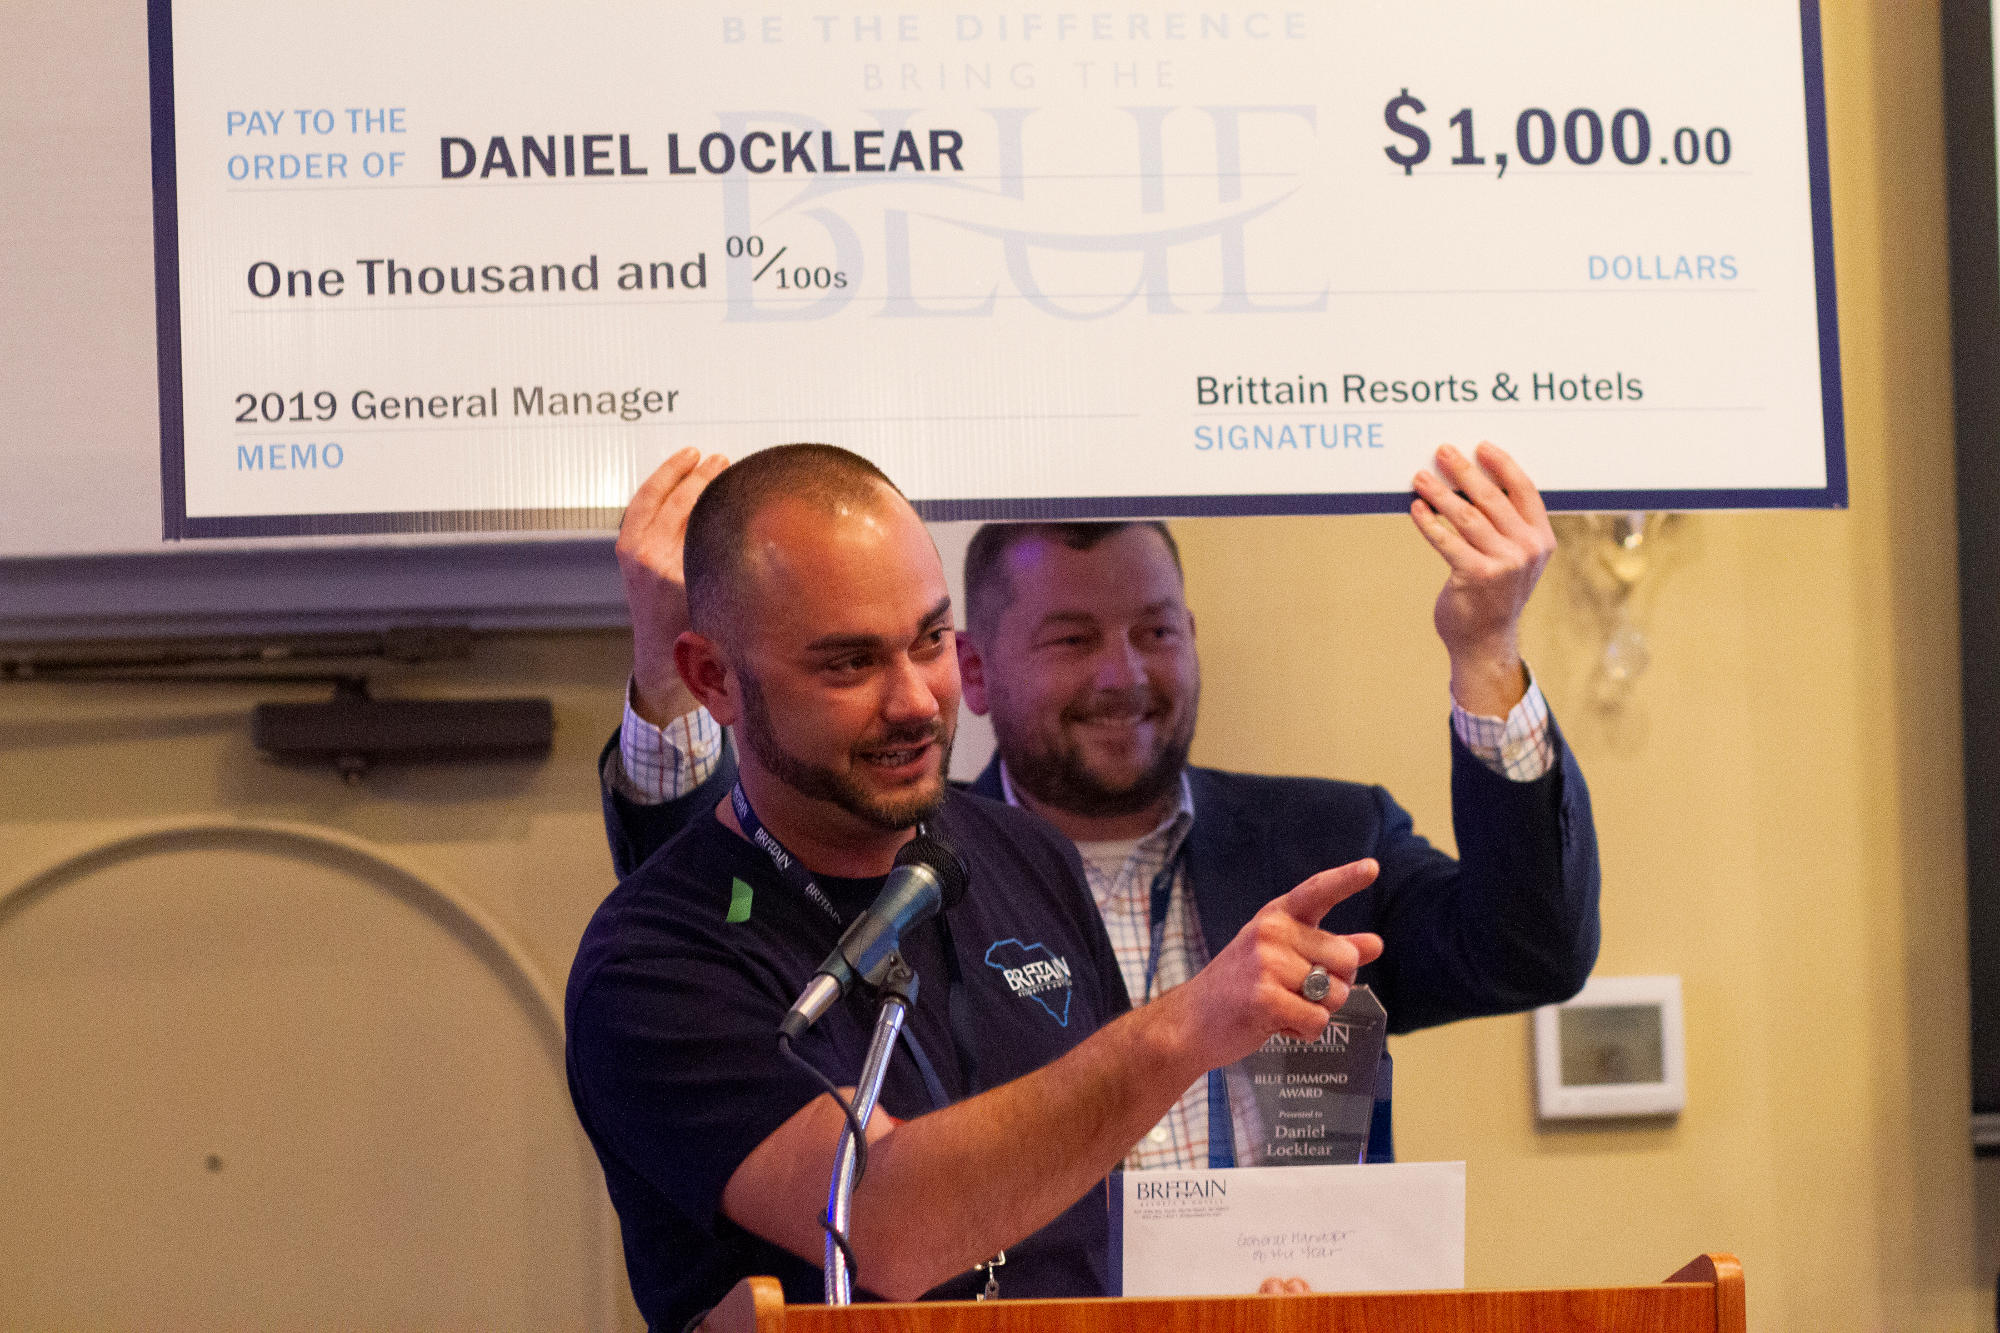 General Manager of the Year - Daniel Locklear